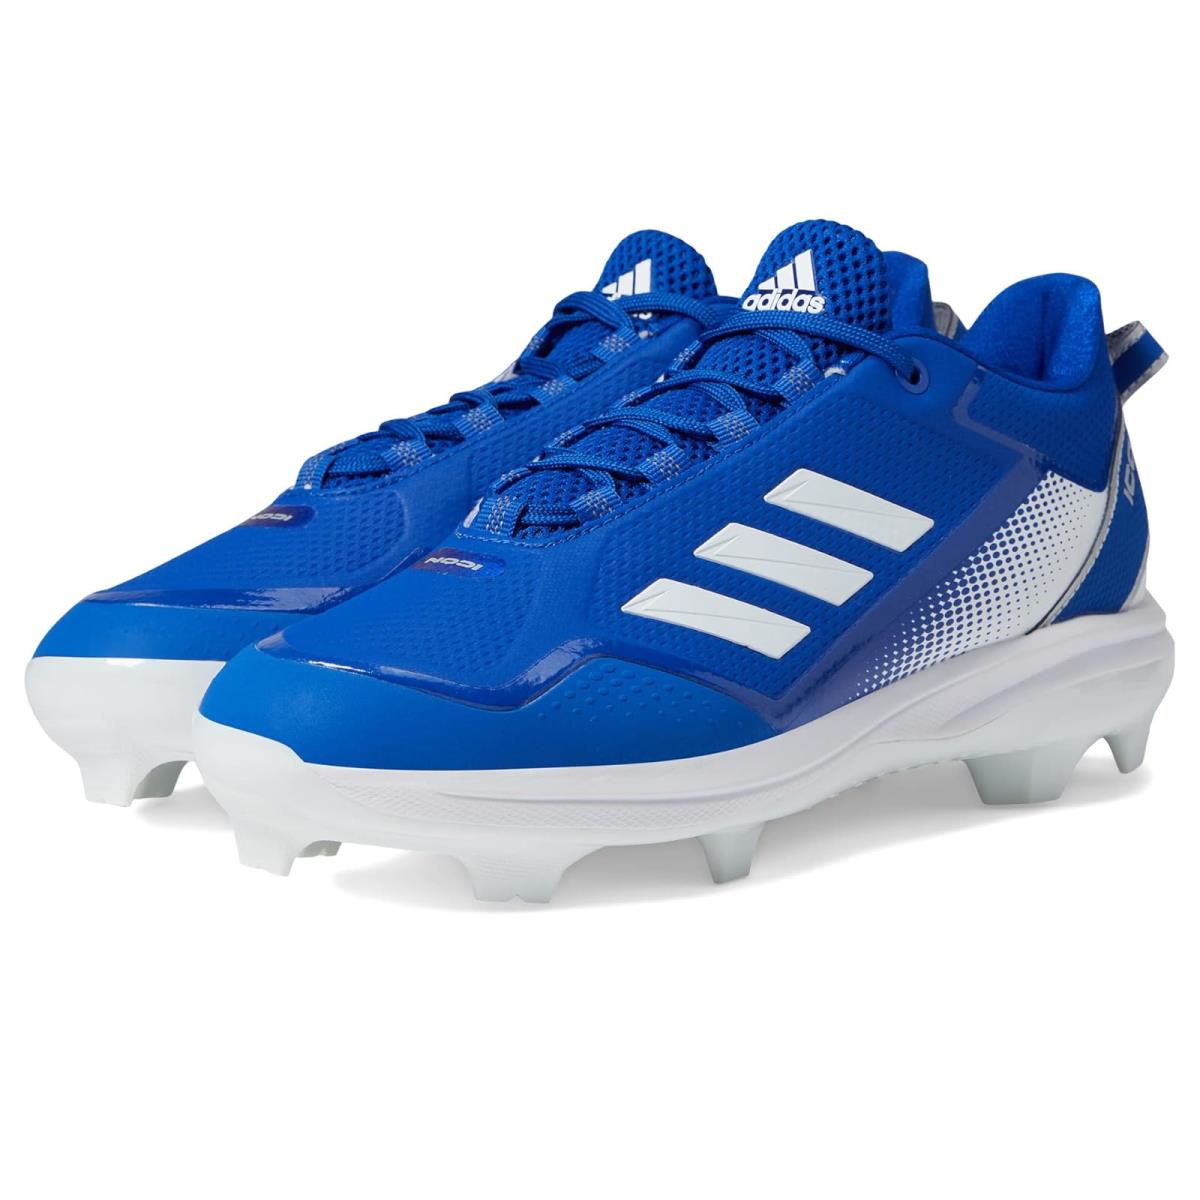 Man`s Sneakers Athletic Shoes Adidas Icon 7 Tpu Baseball Cleats Team Royal Blue/Silver Metallic/White